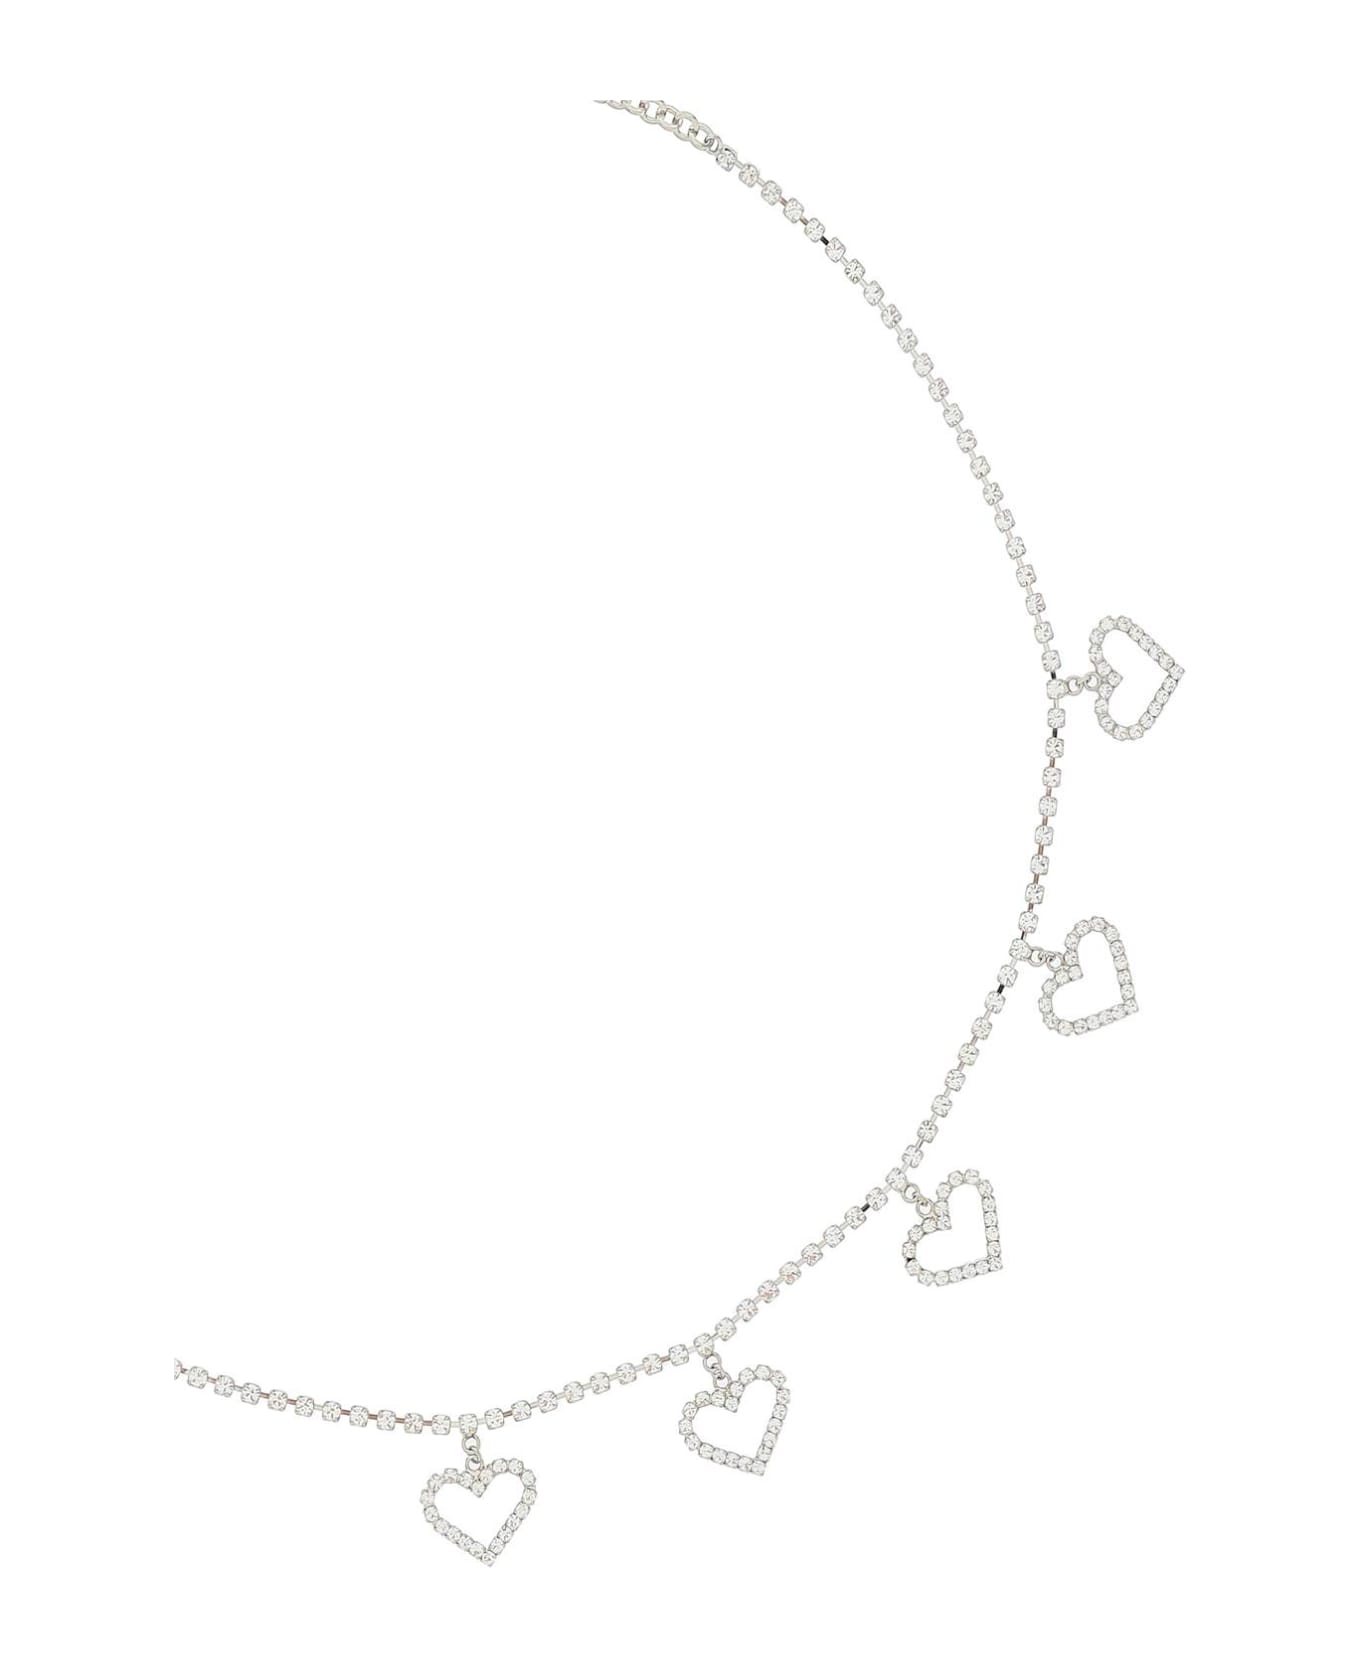 Alessandra Rich Crystal Belt With Heart Pendants - CRYSTAL SILVER (Silver) ベルト